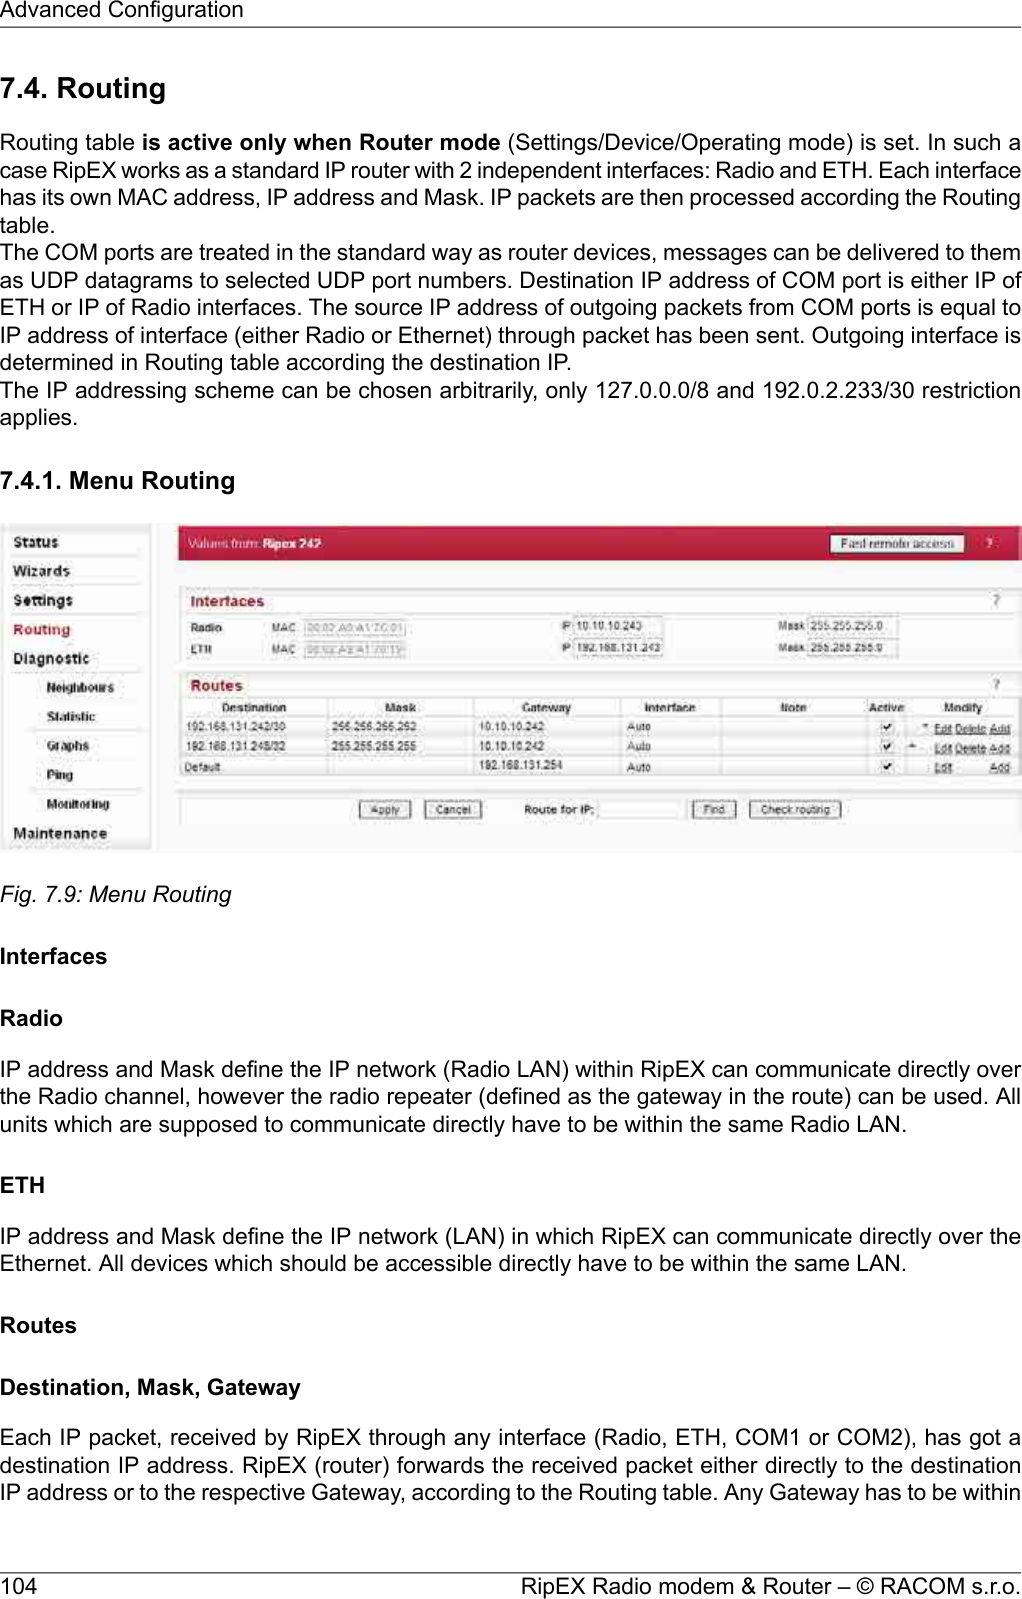 7.4. RoutingRouting table is active only when Router mode (Settings/Device/Operating mode) is set. In such acase RipEX works as a standard IP router with 2 independent interfaces: Radio and ETH. Each interfacehas its own MAC address, IP address and Mask. IP packets are then processed according the Routingtable.The COM ports are treated in the standard way as router devices, messages can be delivered to themas UDP datagrams to selected UDP port numbers. Destination IP address of COM port is either IP ofETH or IP of Radio interfaces. The source IP address of outgoing packets from COM ports is equal toIP address of interface (either Radio or Ethernet) through packet has been sent. Outgoing interface isdetermined in Routing table according the destination IP.The IP addressing scheme can be chosen arbitrarily, only 127.0.0.0/8 and 192.0.2.233/30 restrictionapplies.7.4.1. Menu RoutingFig. 7.9: Menu RoutingInterfacesRadioIP address and Mask define the IP network (Radio LAN) within RipEX can communicate directly overthe Radio channel, however the radio repeater (defined as the gateway in the route) can be used. Allunits which are supposed to communicate directly have to be within the same Radio LAN.ETHIP address and Mask define the IP network (LAN) in which RipEX can communicate directly over theEthernet. All devices which should be accessible directly have to be within the same LAN.RoutesDestination, Mask, GatewayEach IP packet, received by RipEX through any interface (Radio, ETH, COM1 or COM2), has got adestination IP address. RipEX (router) forwards the received packet either directly to the destinationIP address or to the respective Gateway, according to the Routing table. Any Gateway has to be withinRipEX Radio modem &amp; Router – © RACOM s.r.o.104Advanced Configuration